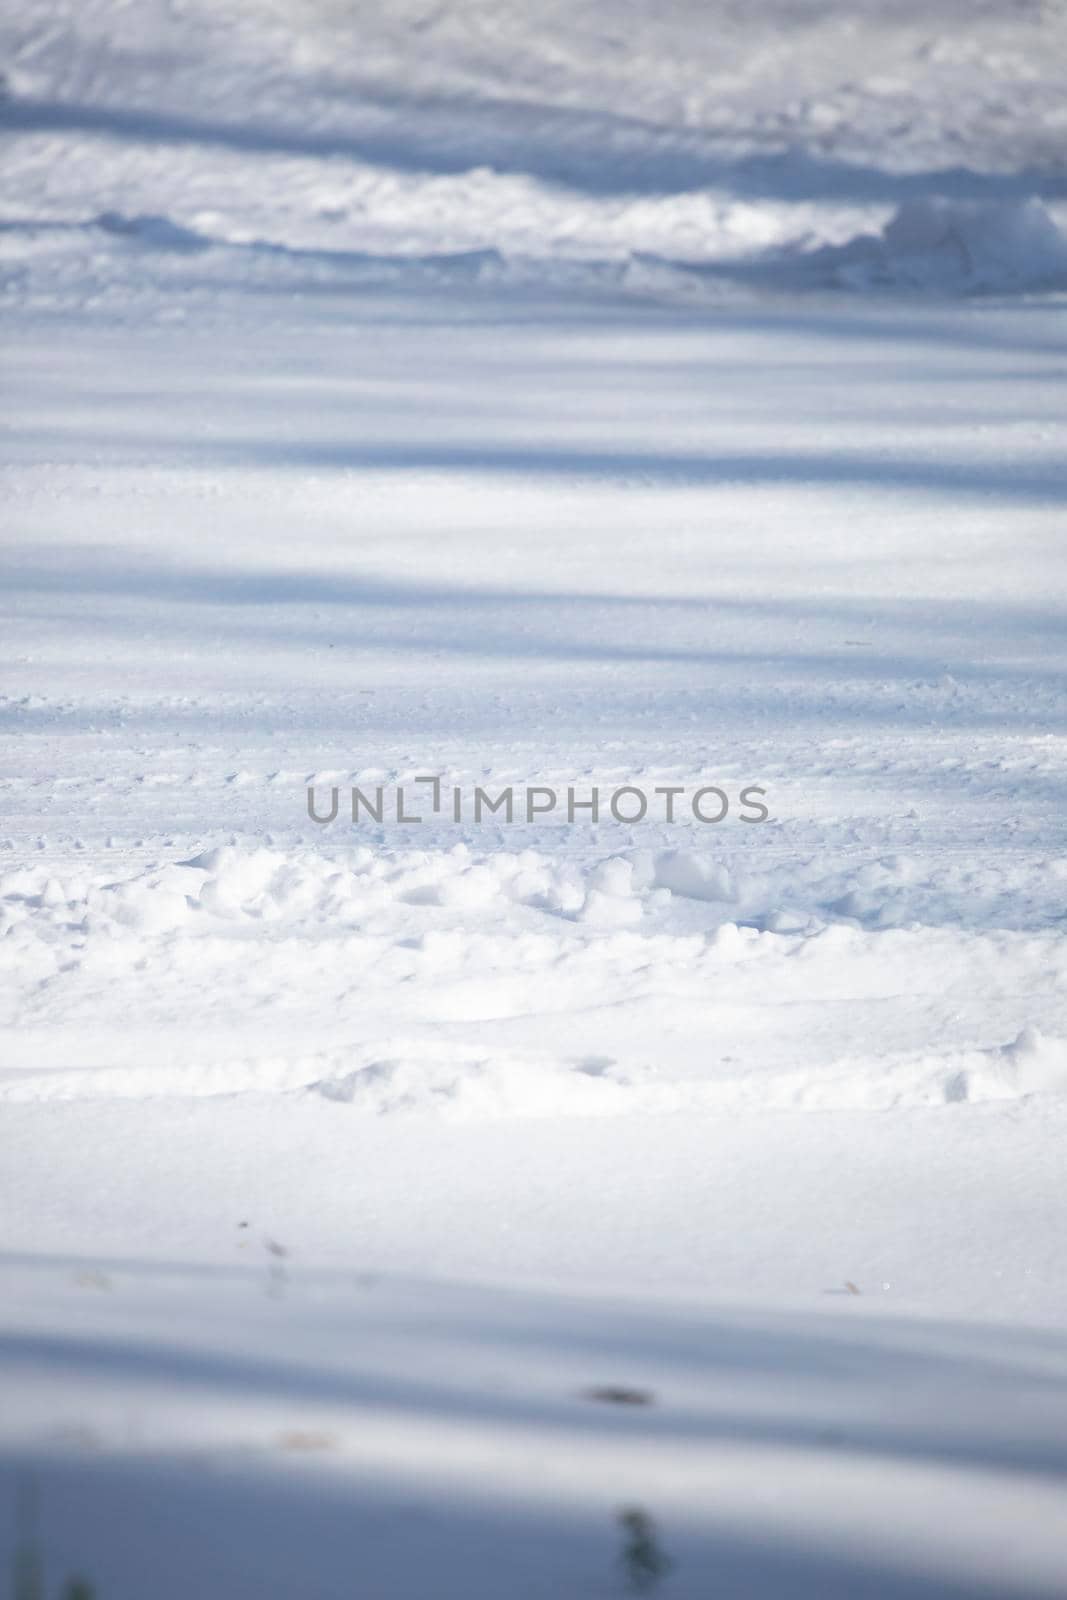 Shallow tire tracks on a dangerous snow-covered road